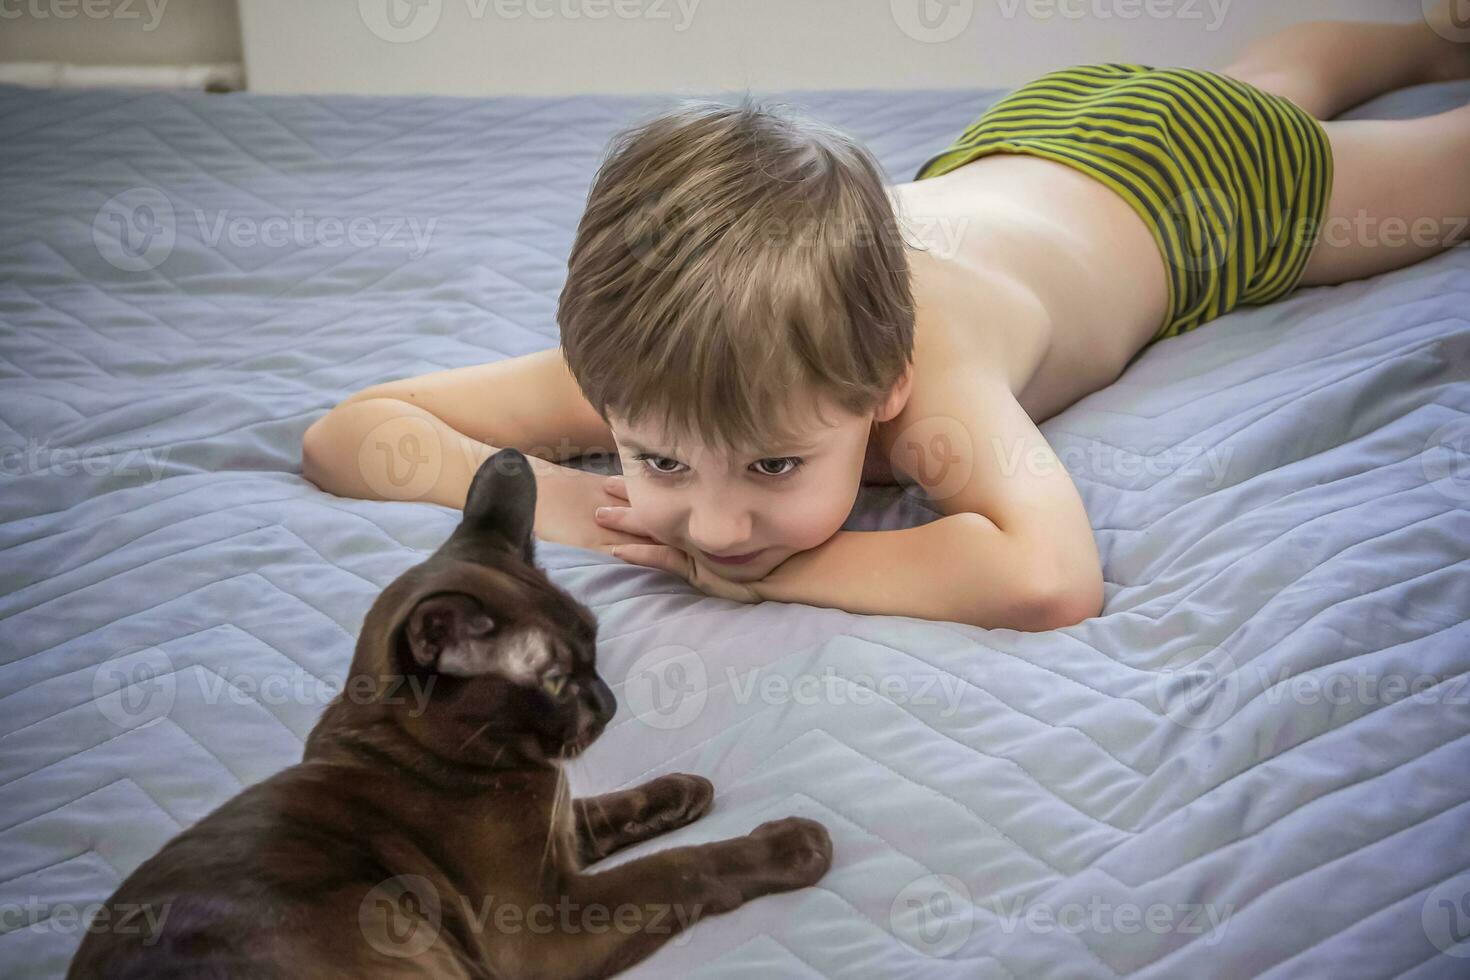 Cute boy without a T-shirt. A blond-haired boy is lying on the bed in a natural setting, and a cat is next to him. The face expresses natural emotions. photo